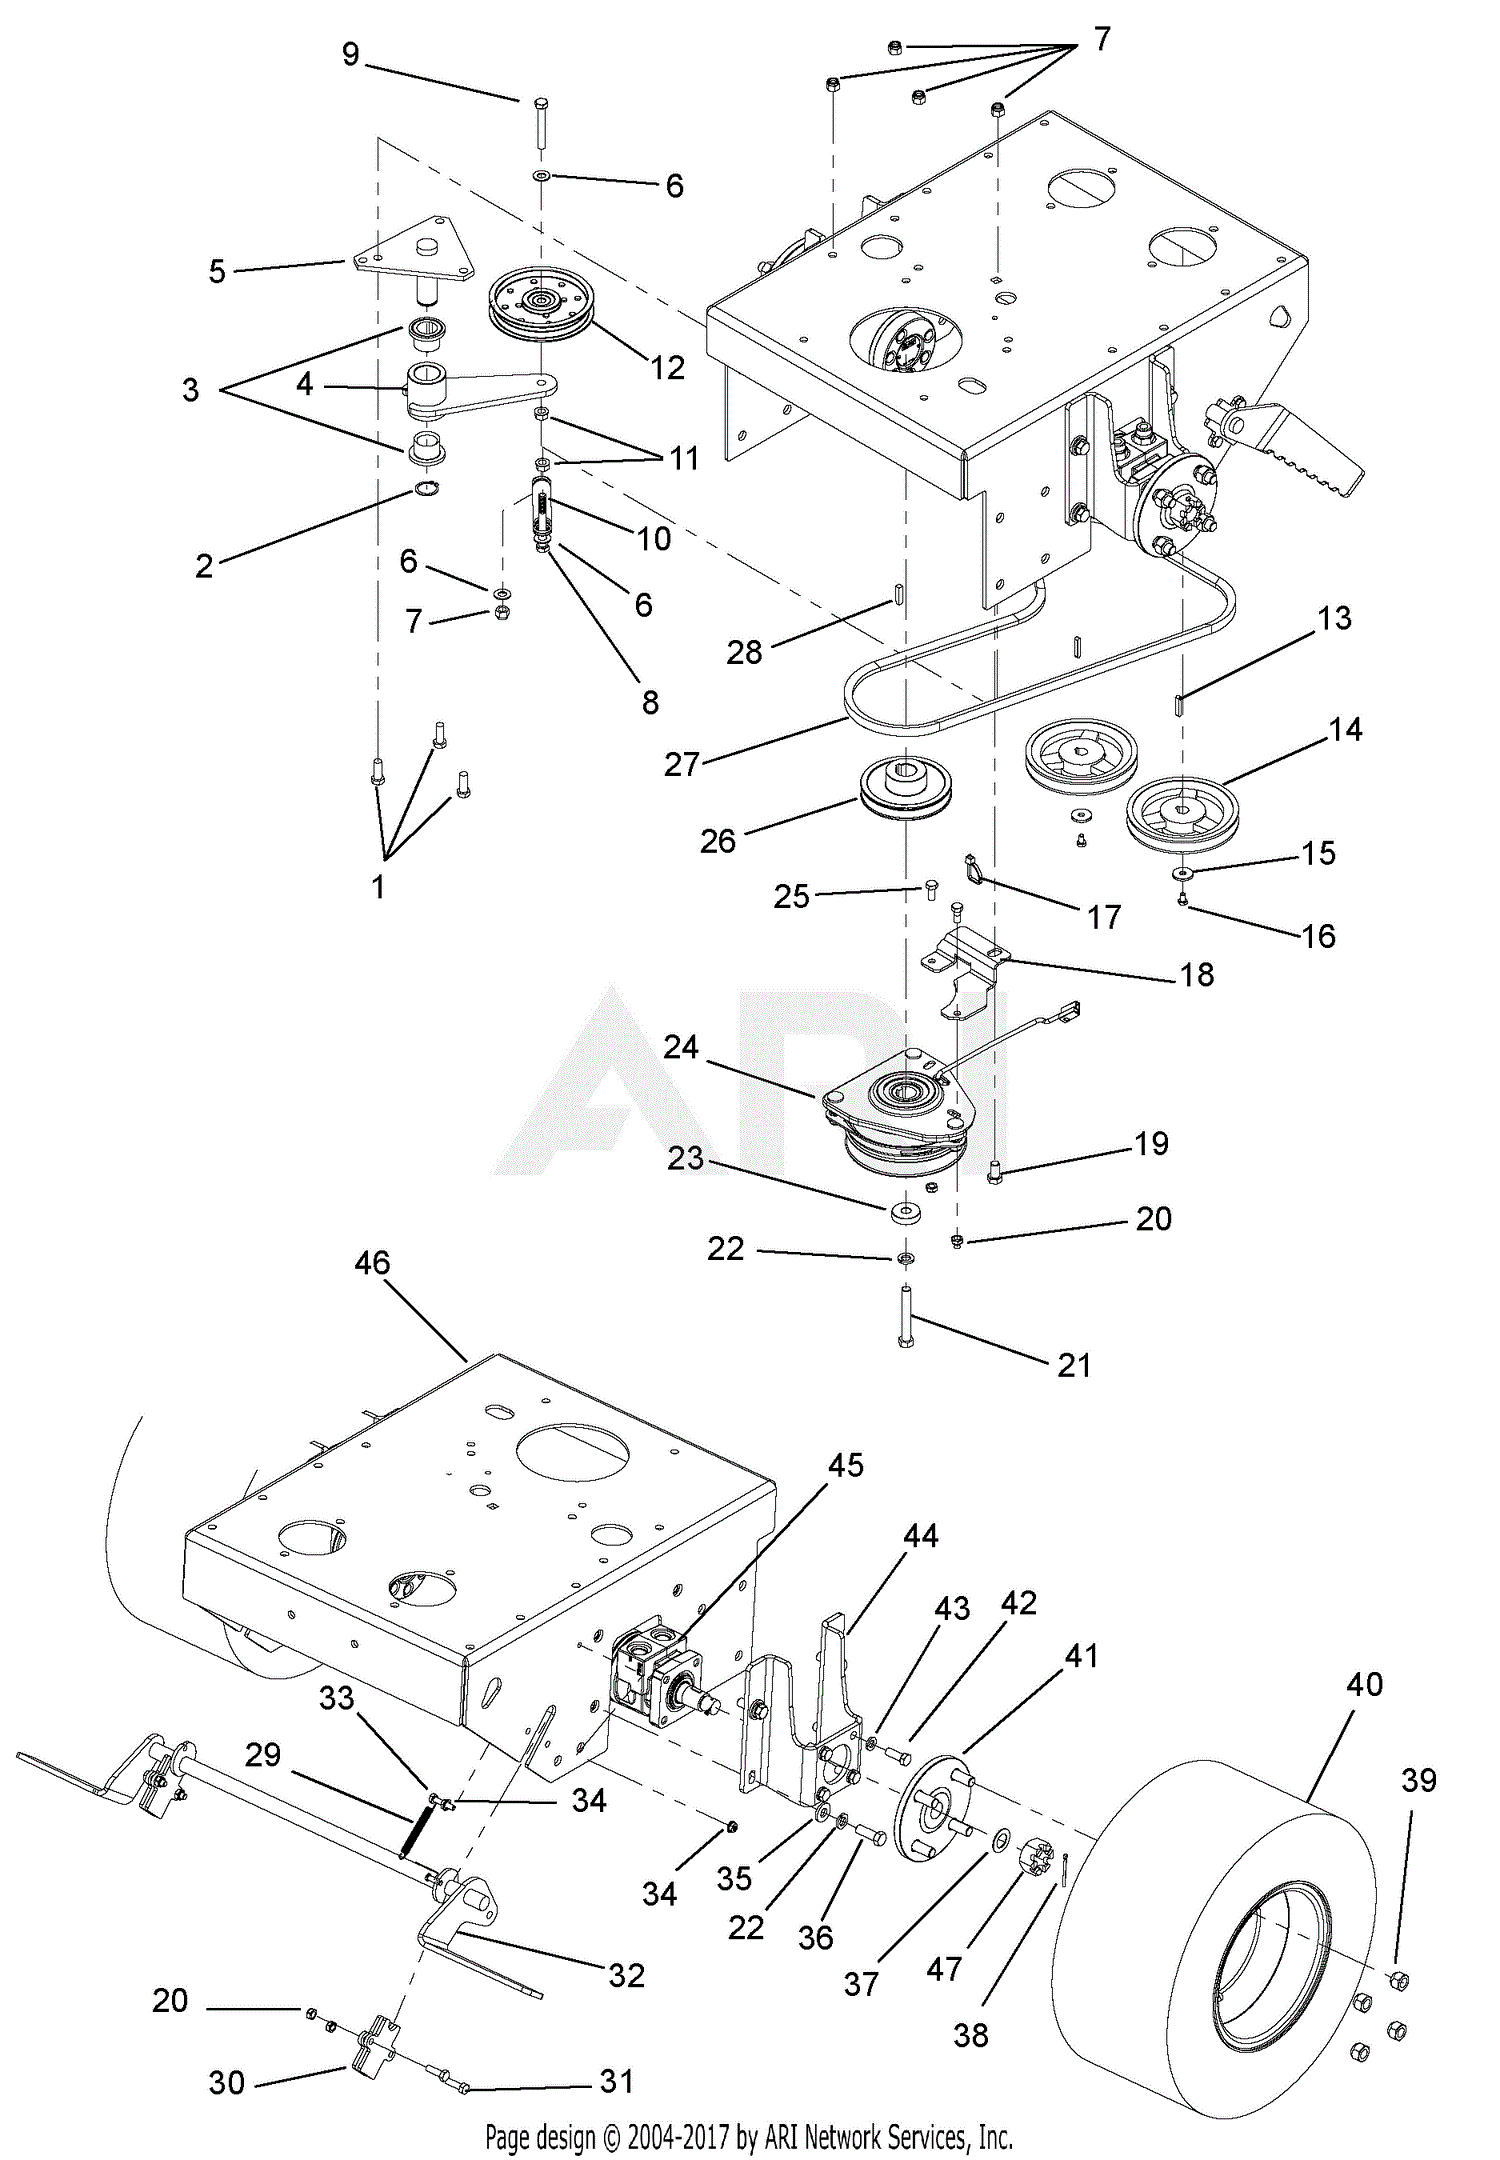 [DIAGRAM] Wiring Diagram For Gravely 812 FULL Version HD Quality